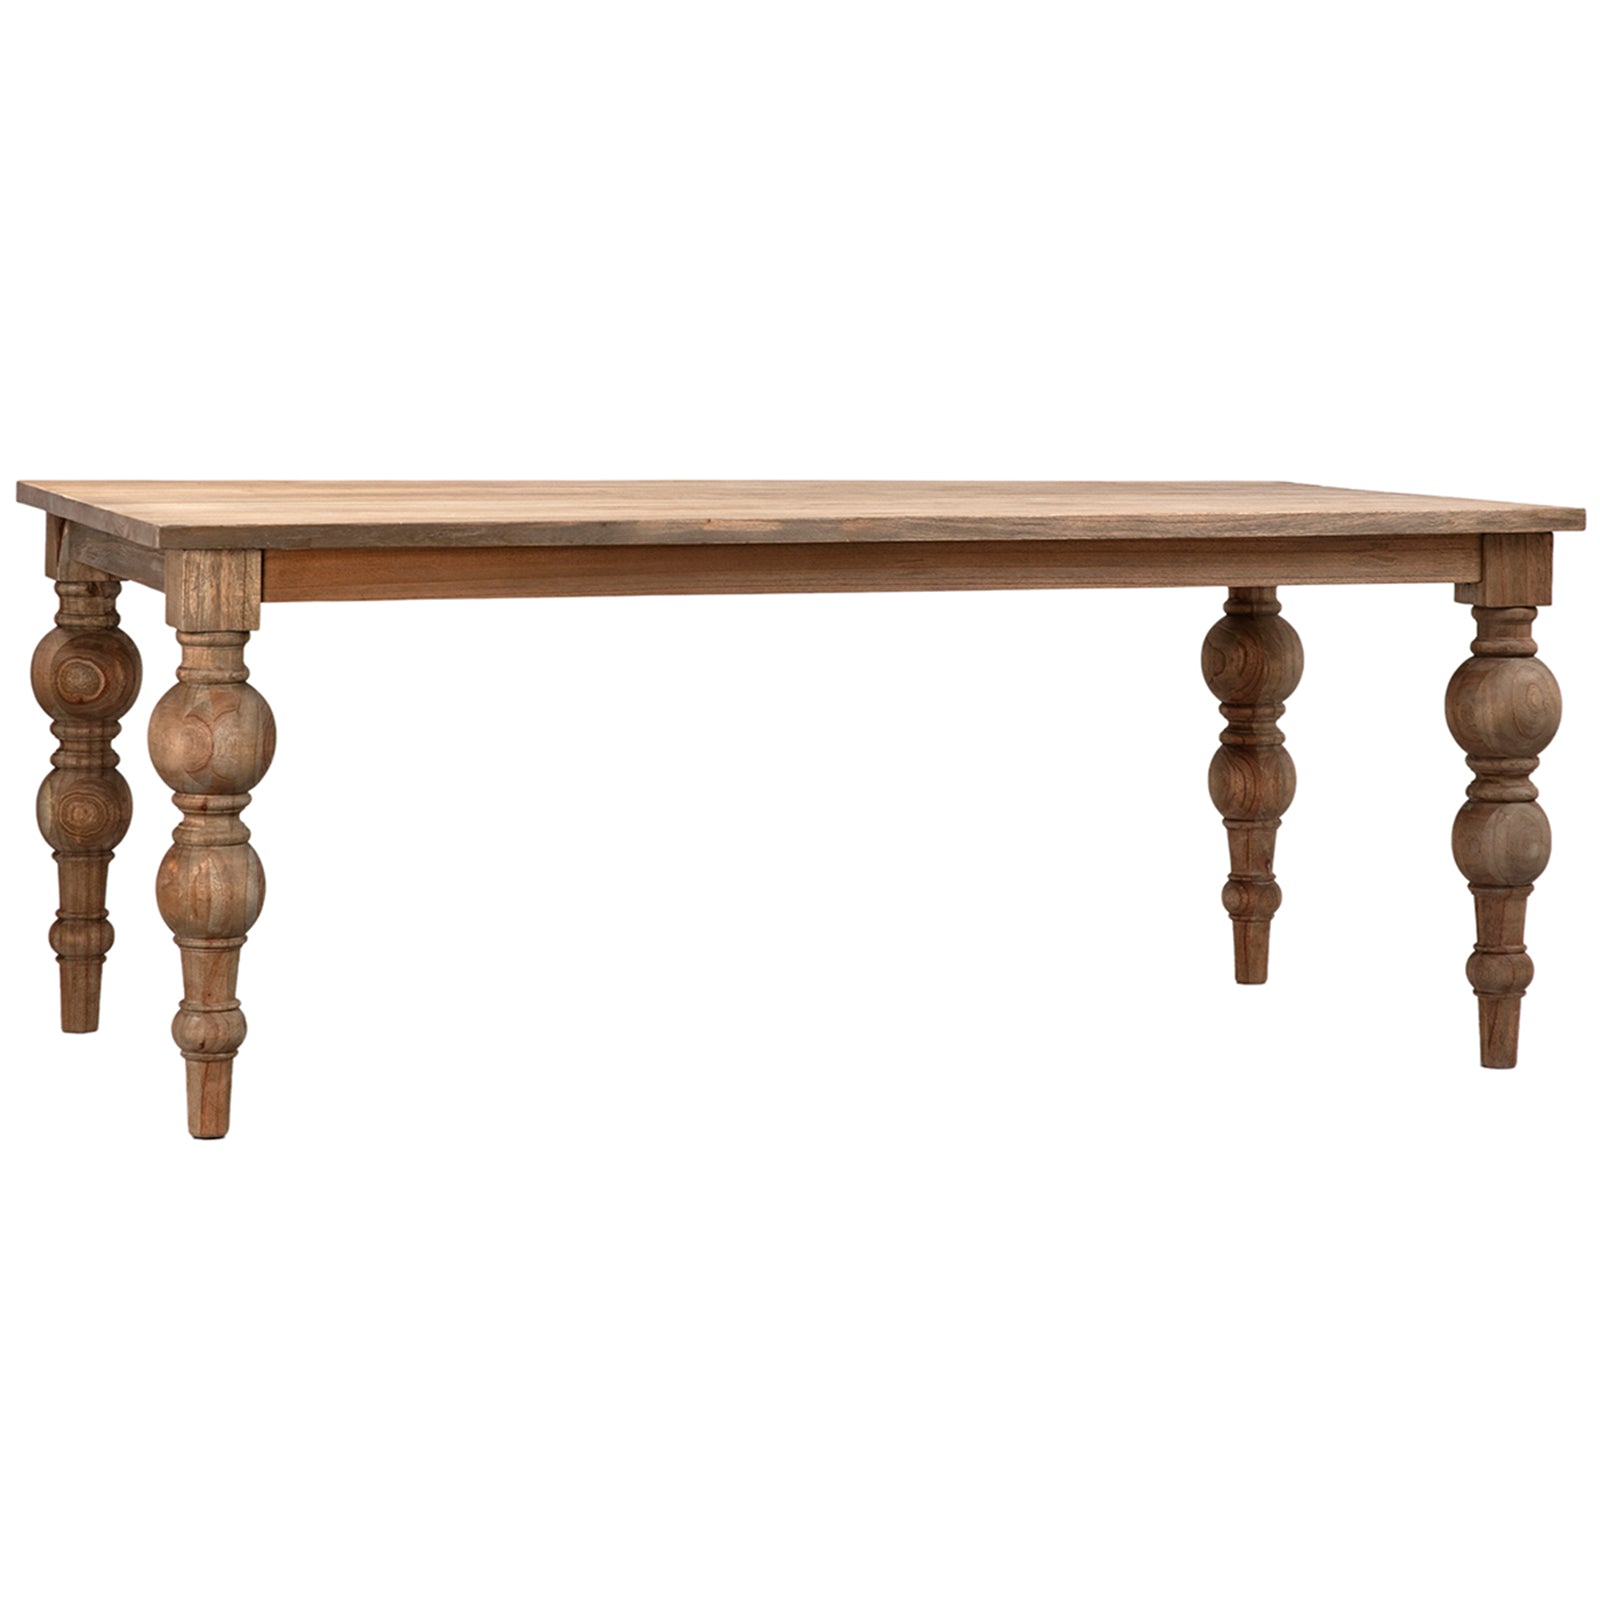 Atmore Dining Table